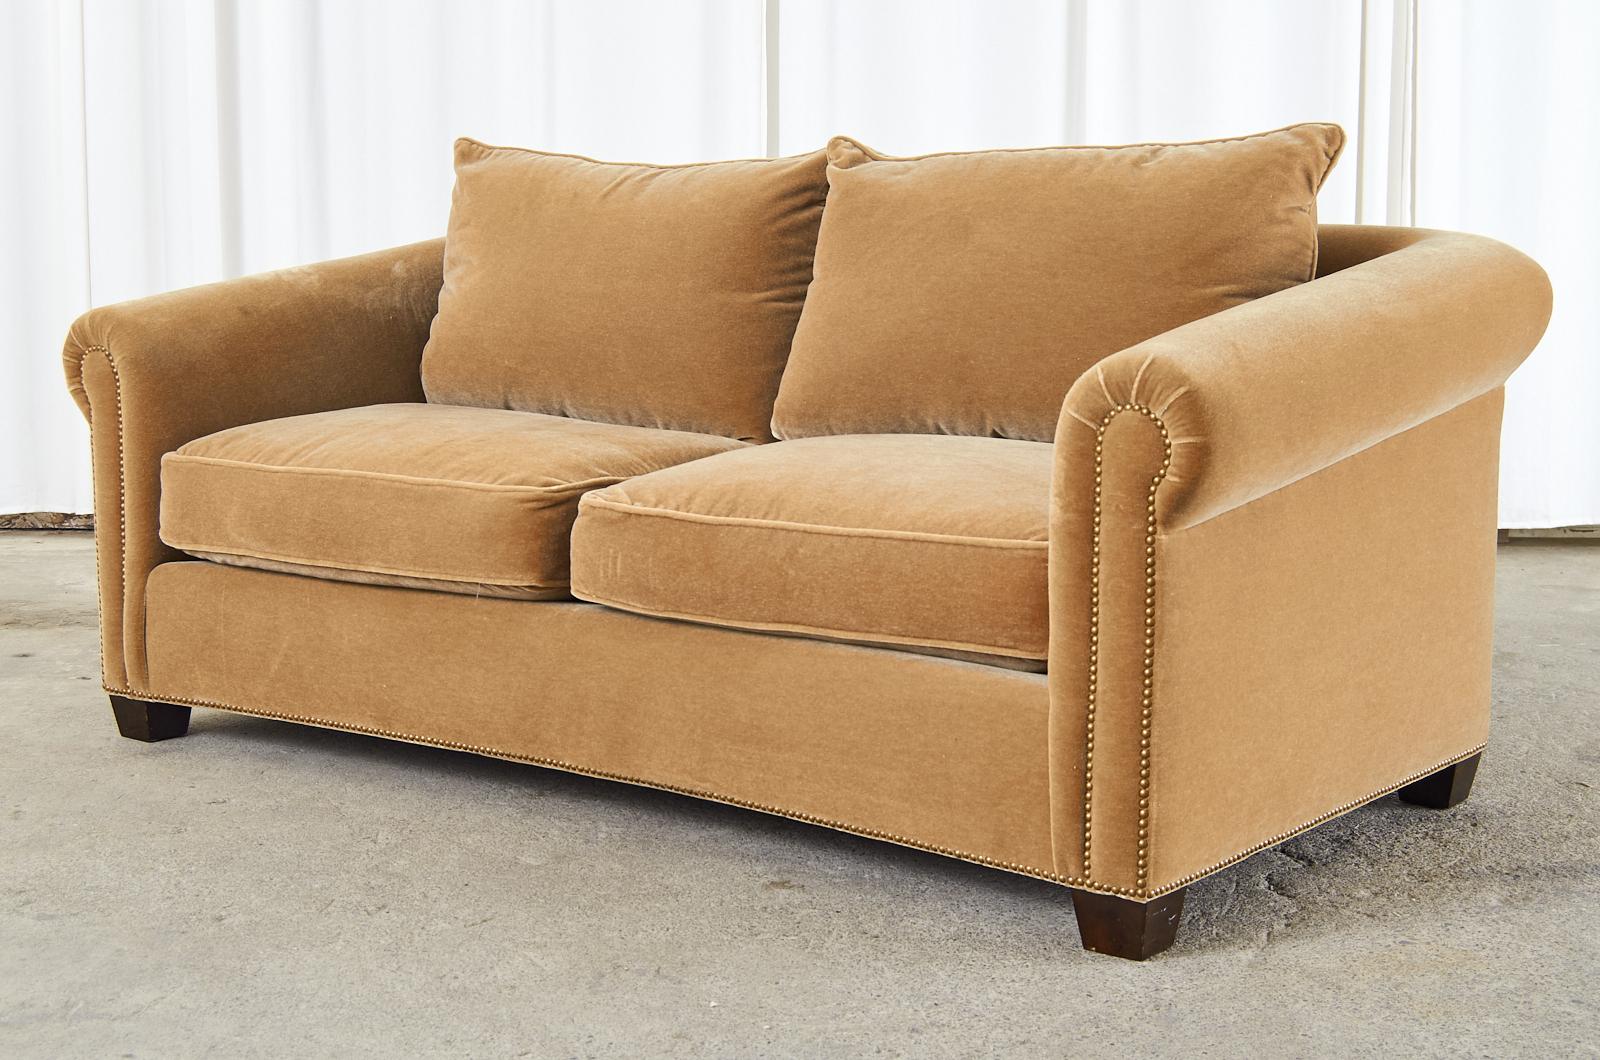 Gorgeous bespoke camel color mohair sofa settee featuring a hardwood frame made in the English style with rolled arms. Bespoke sofa custom ordered from the design center in San Francisco. Fitted with deep seat cushions and back pillows. The front of